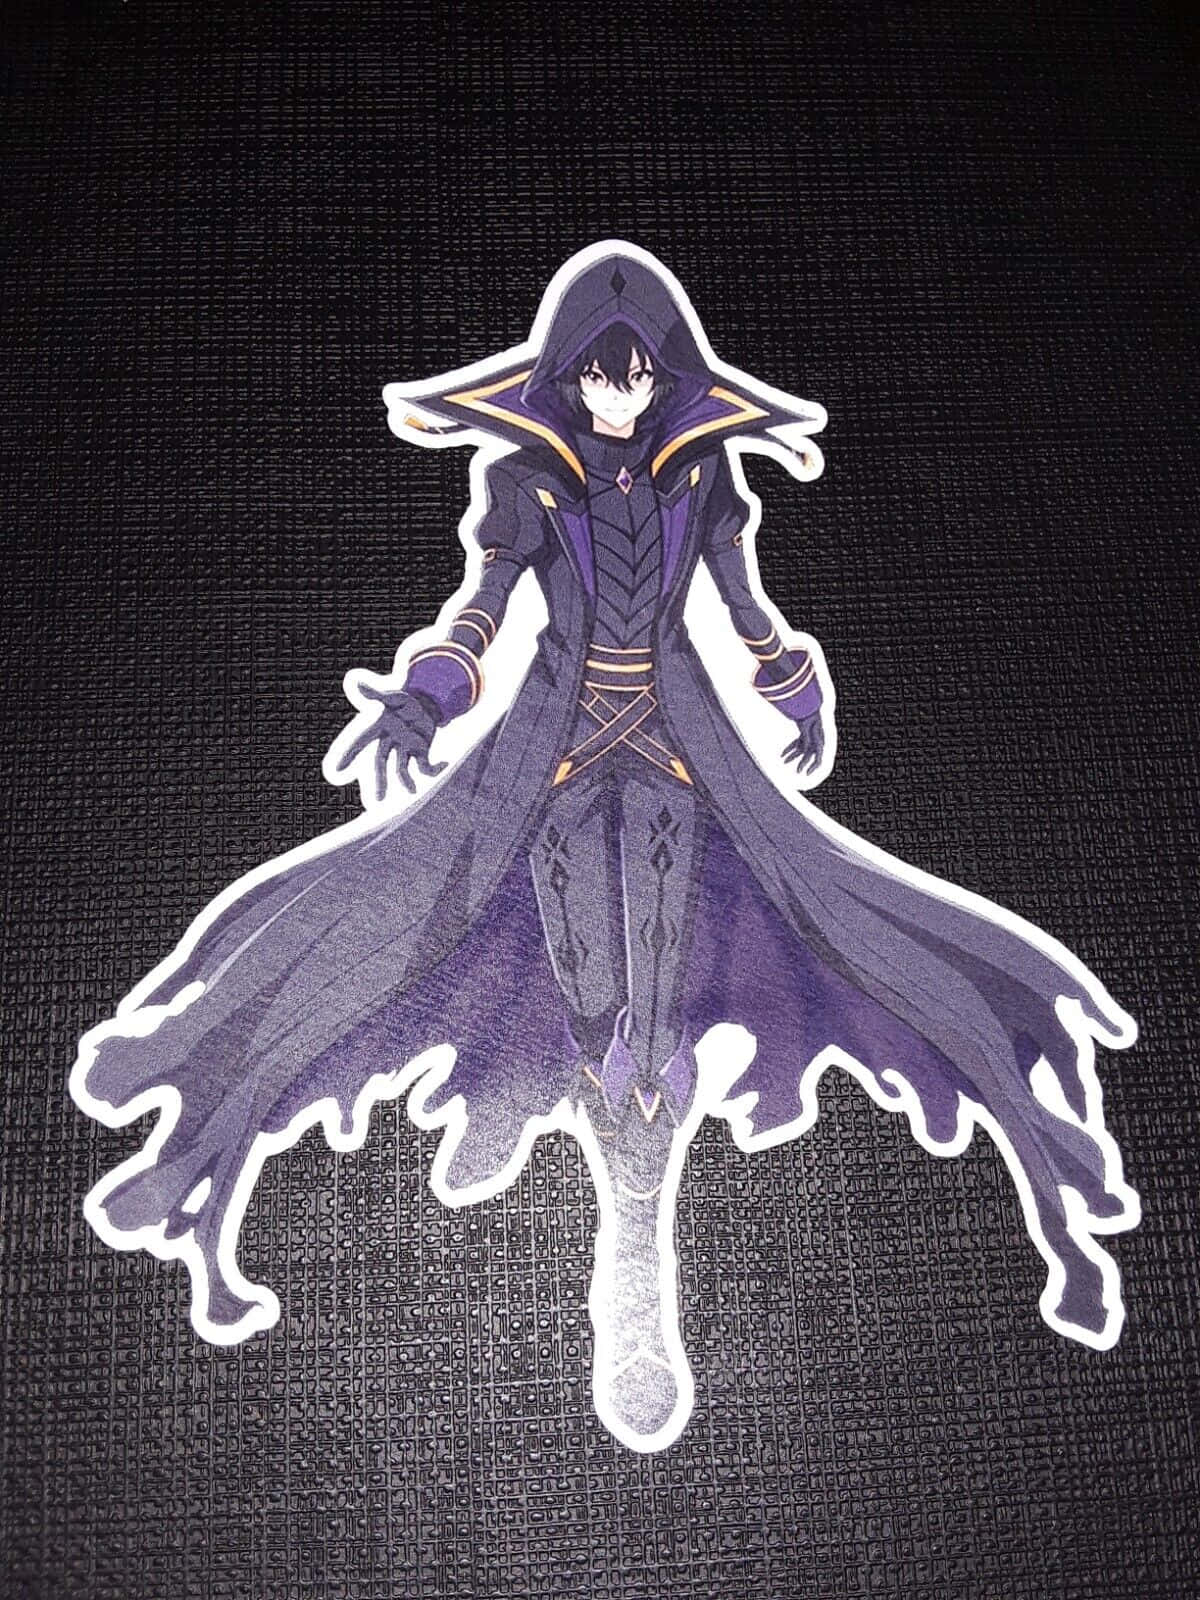 Mysterious Cloaked Figure Sticker Wallpaper